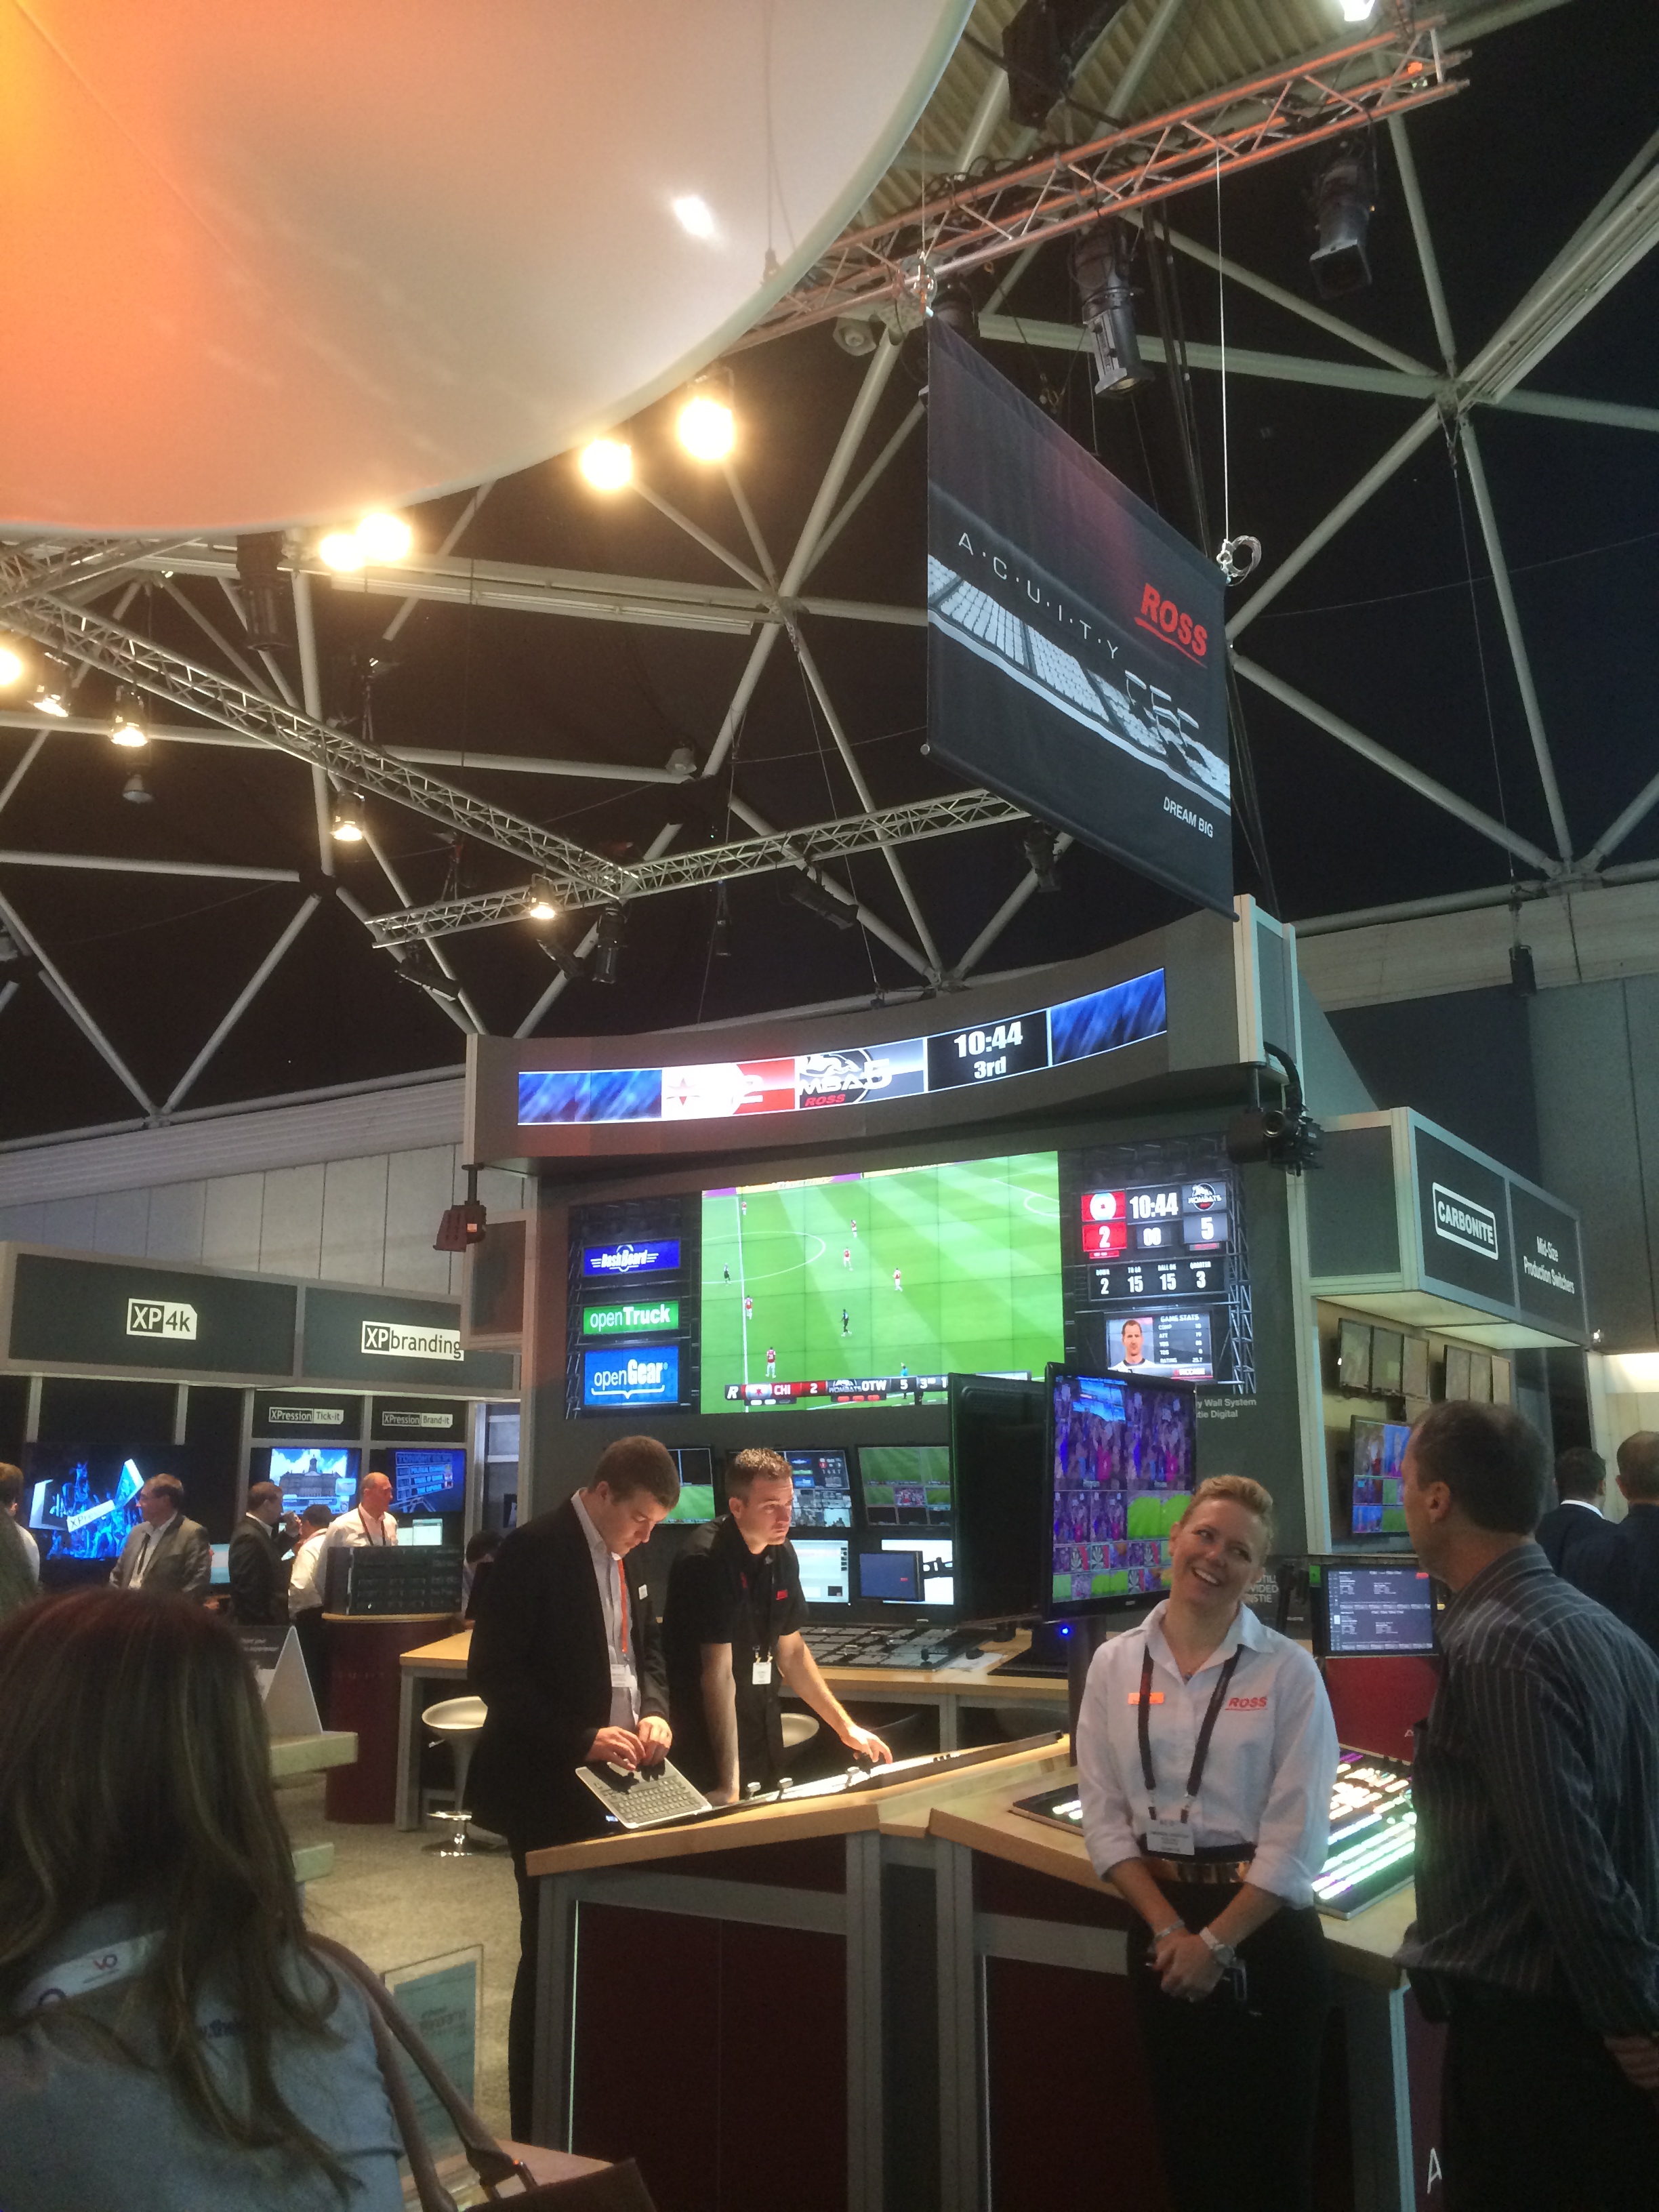 Ross video stand at ibc show